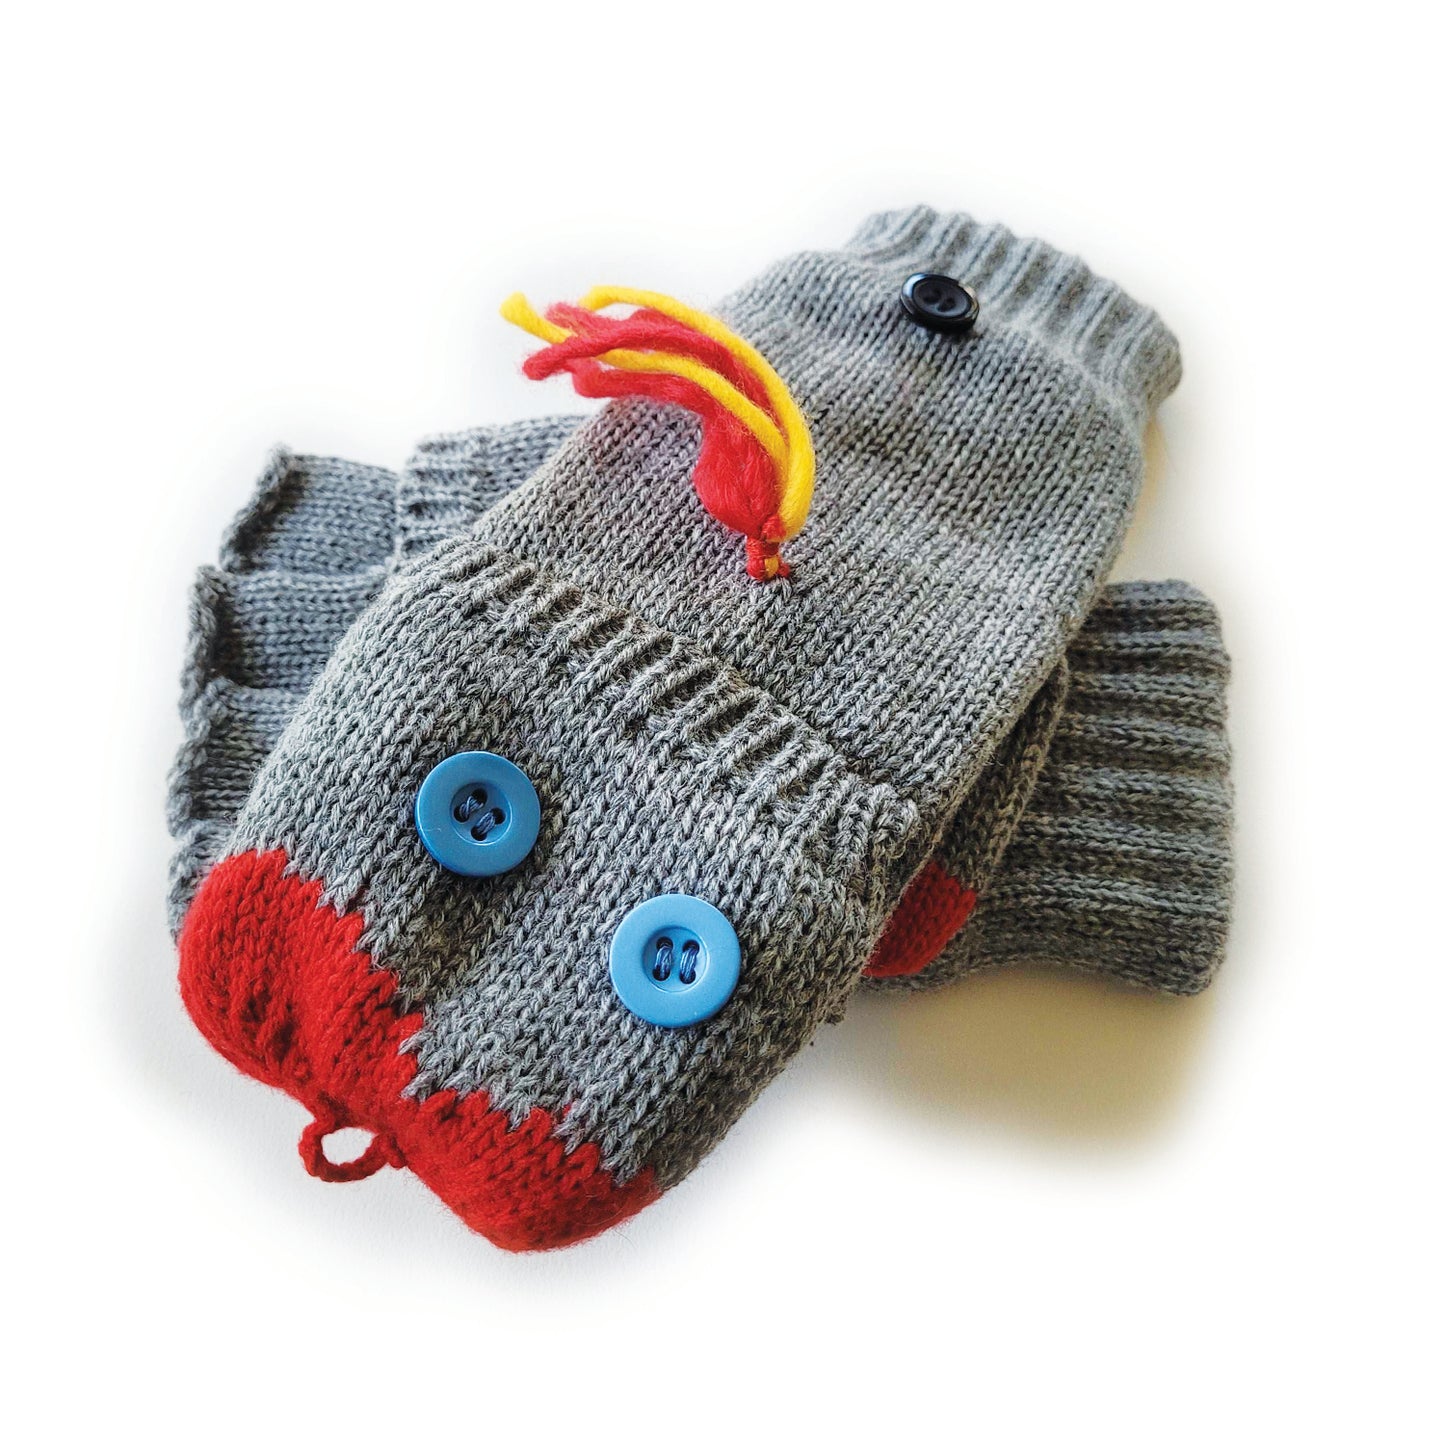 A set of knit grey flip-top mittens, each with two blue button 'eyes' sewn onto the flip top. Red yarn forms a sock puppet 'mouth' at the top and there is red-and-yellow yarn 'hair' sewn below the knuckles. 